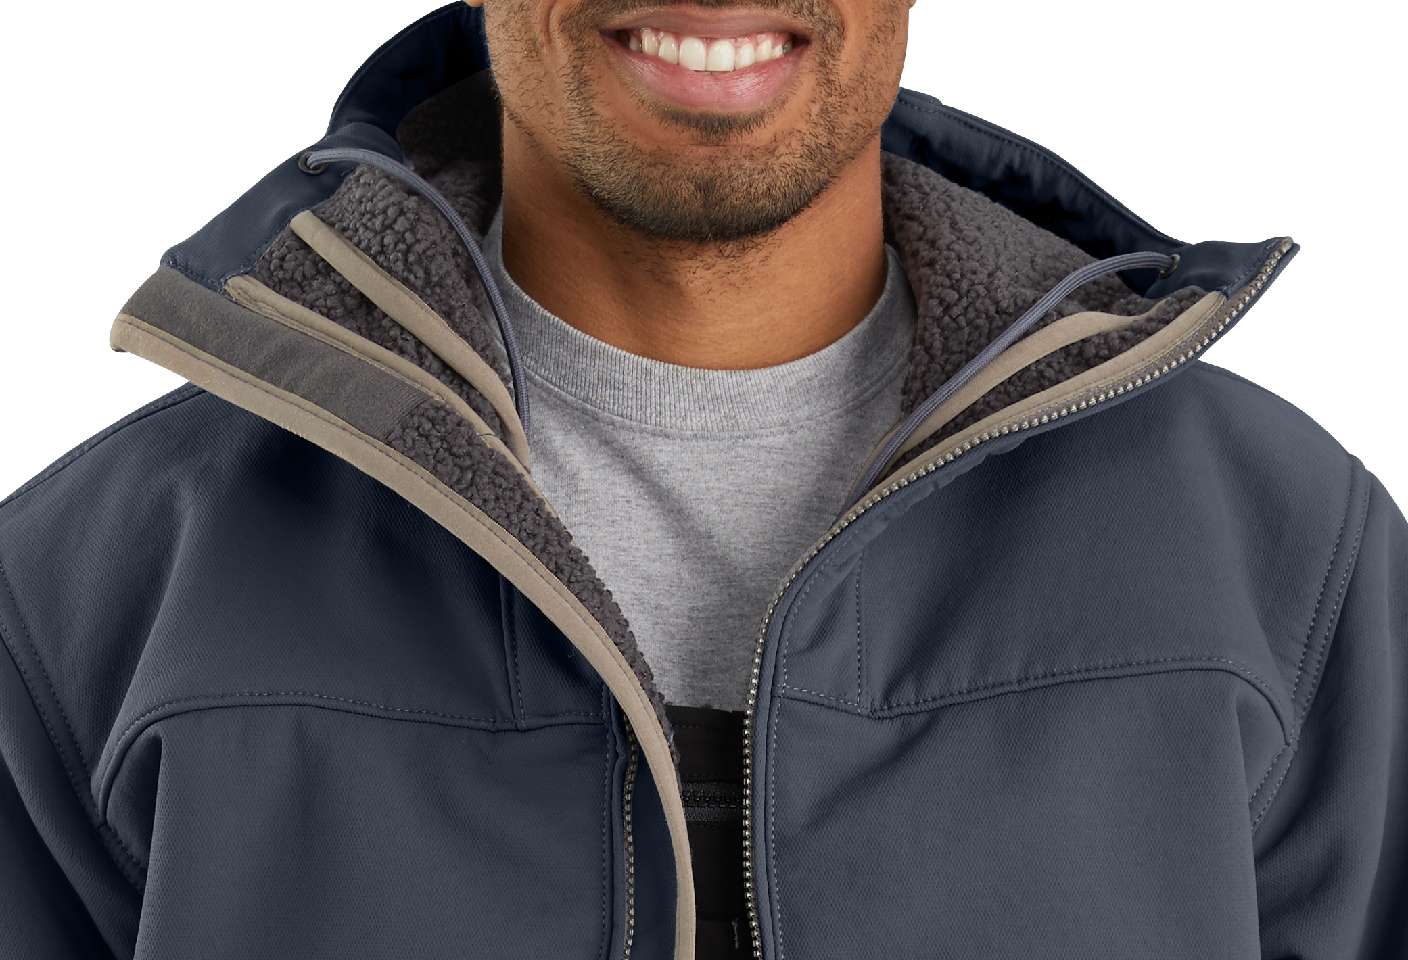 Hood with adjustable hidden cord locks for great fit